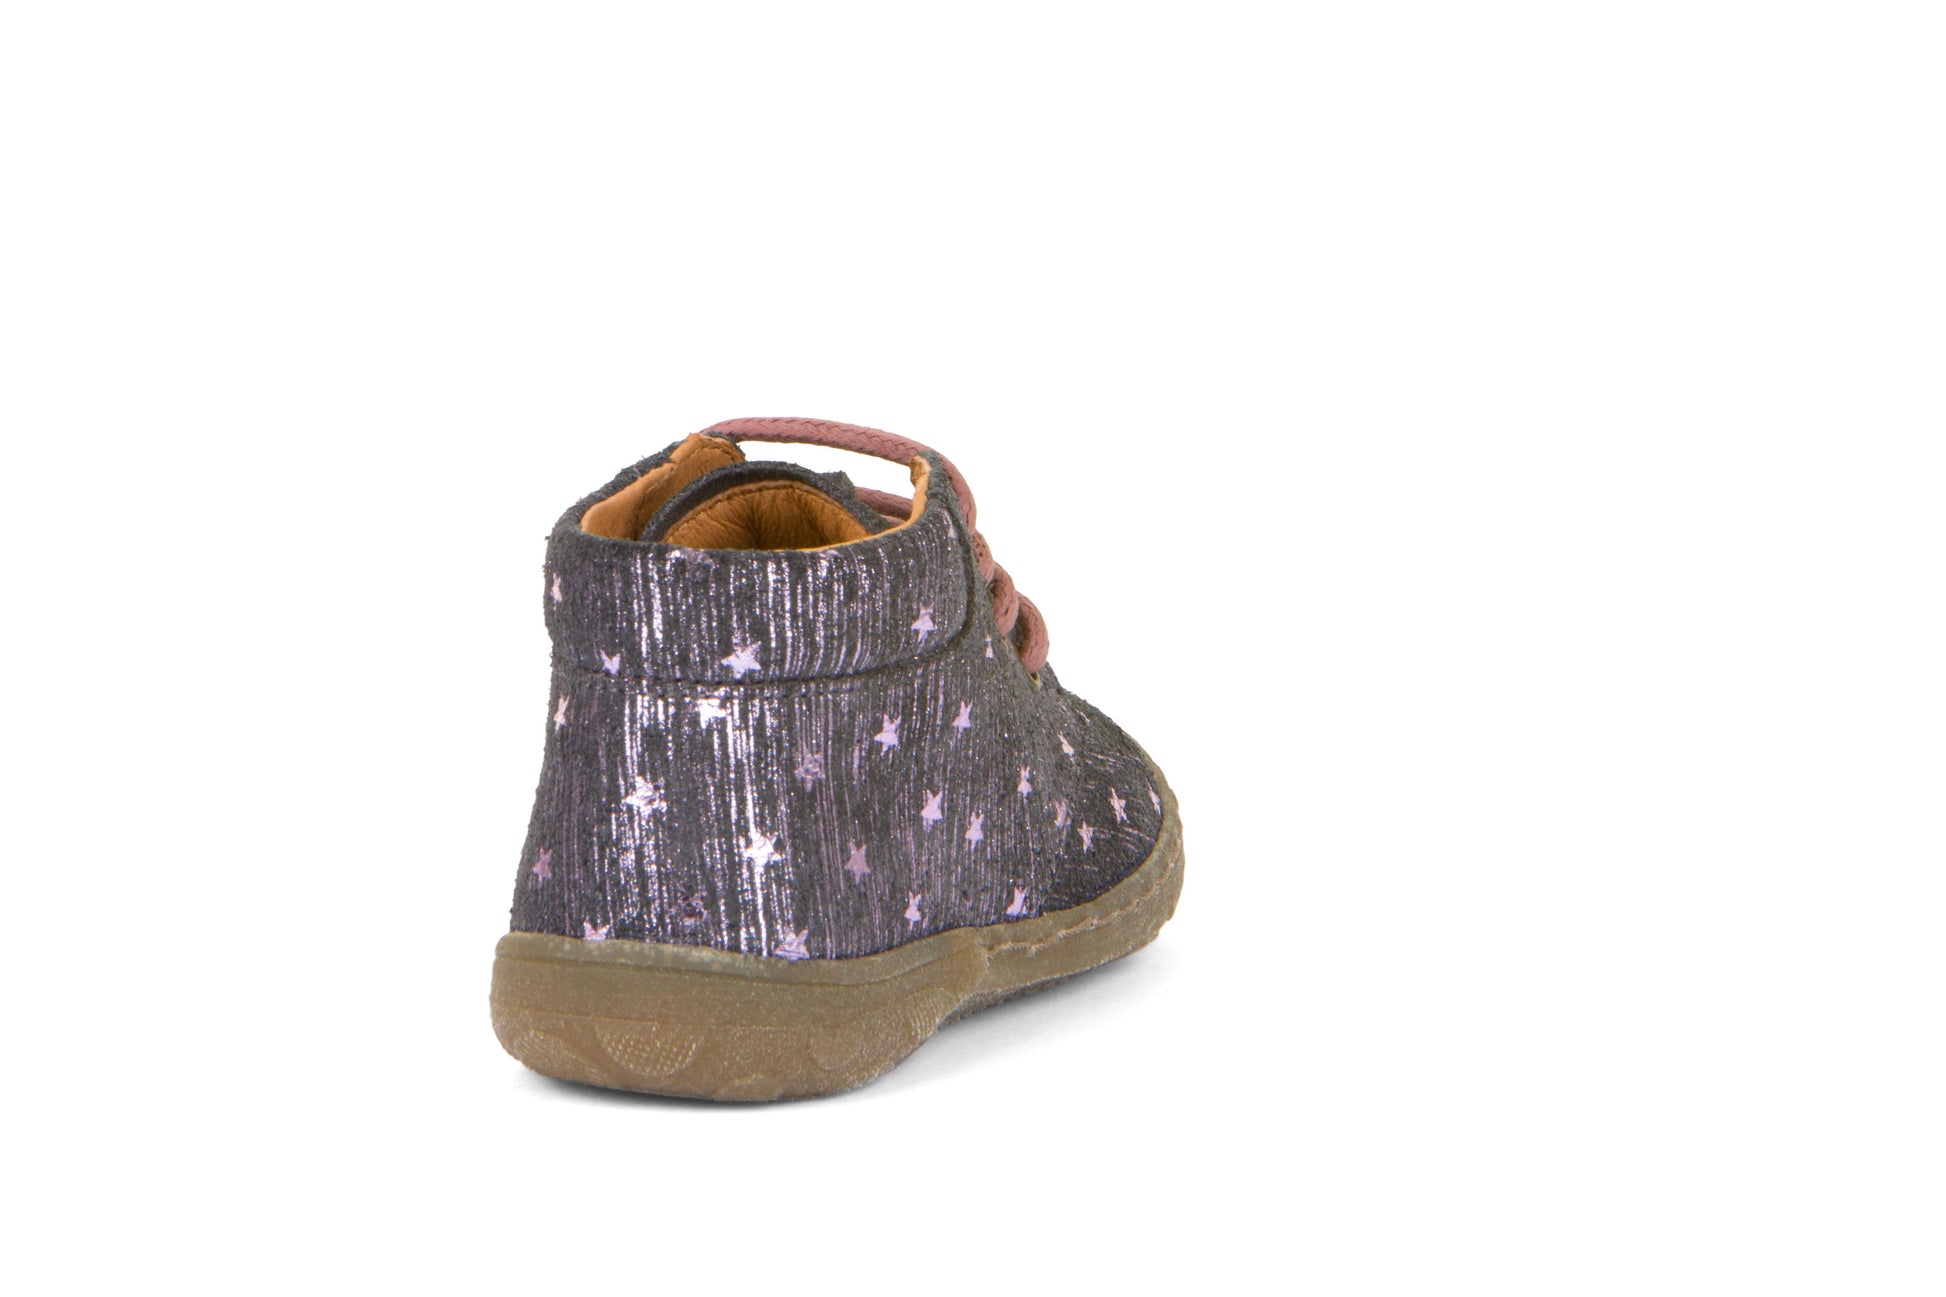 A girls boot by Froddo, style Kart Laces | G2130271-3 in Grey Metallic with star print and lace-up fastening. Back view.